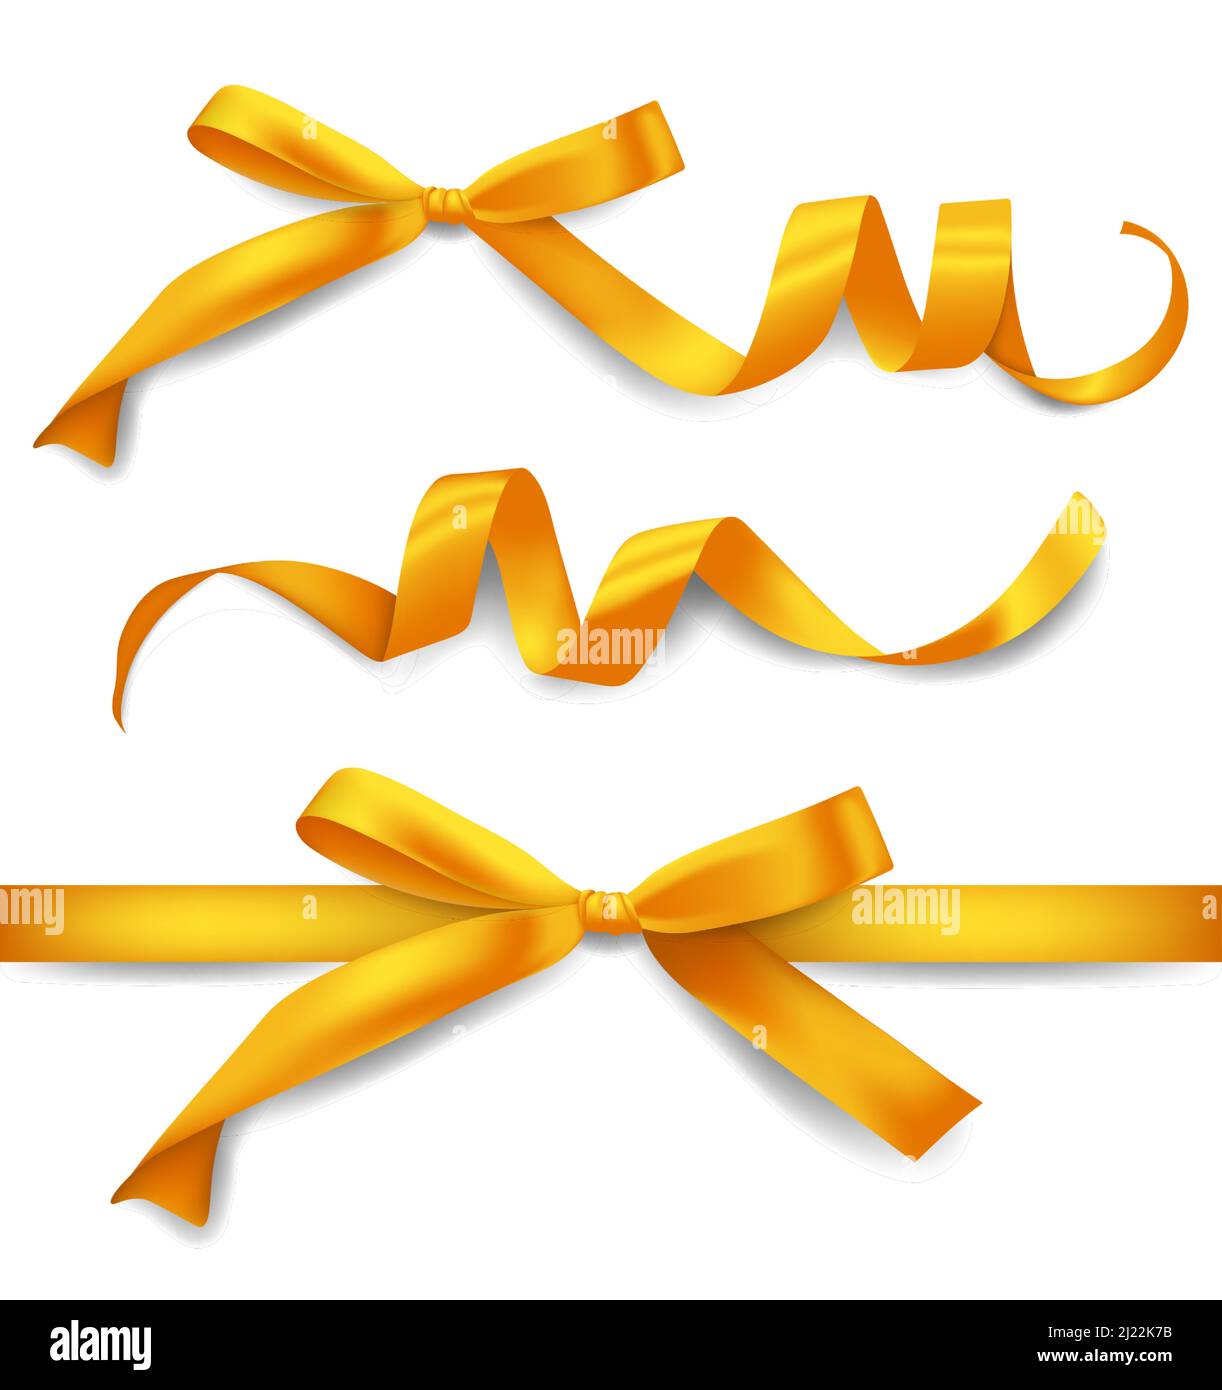 Realistic golden ribbons set with bows, decoration for gift boxes, design element Stock Vector